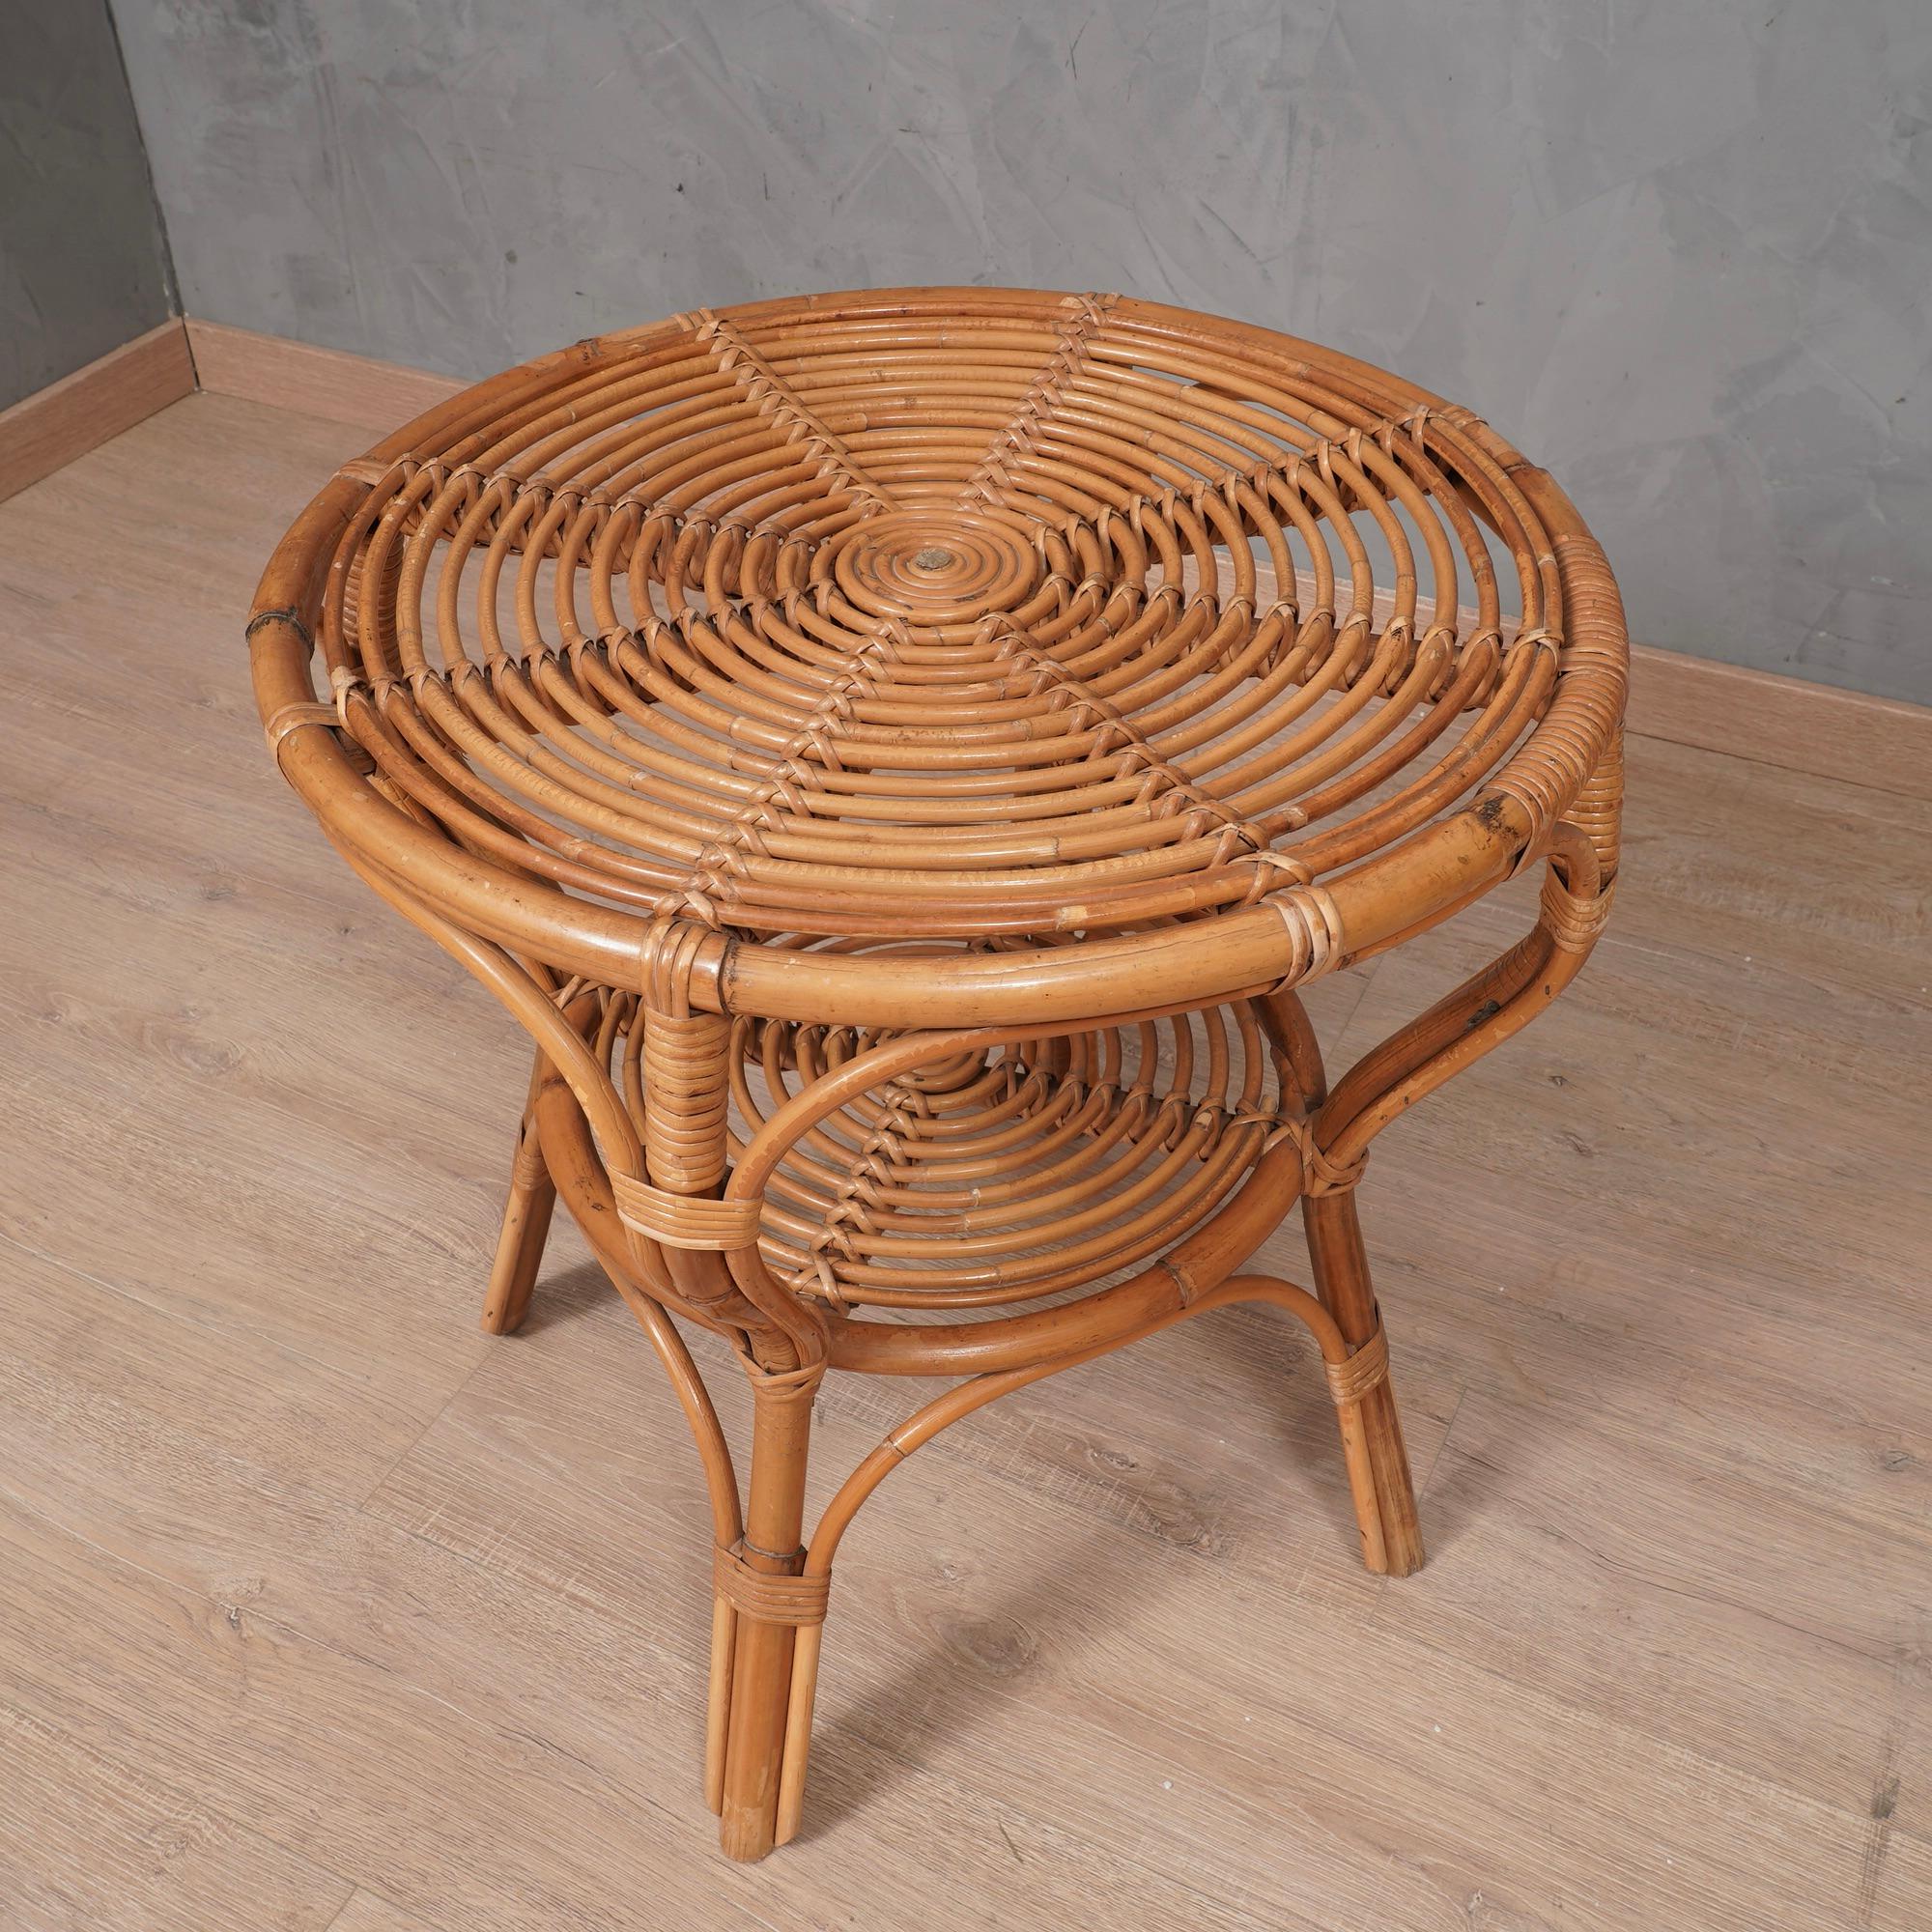 Fantastic rattan side table by Giovanni Travasa for Bonacina; Very comfortable and in perfect state of use.

Hand-woven, the tea table is made up of two overlying tops; they have a circular shape and the internal wicker on the top is made in the